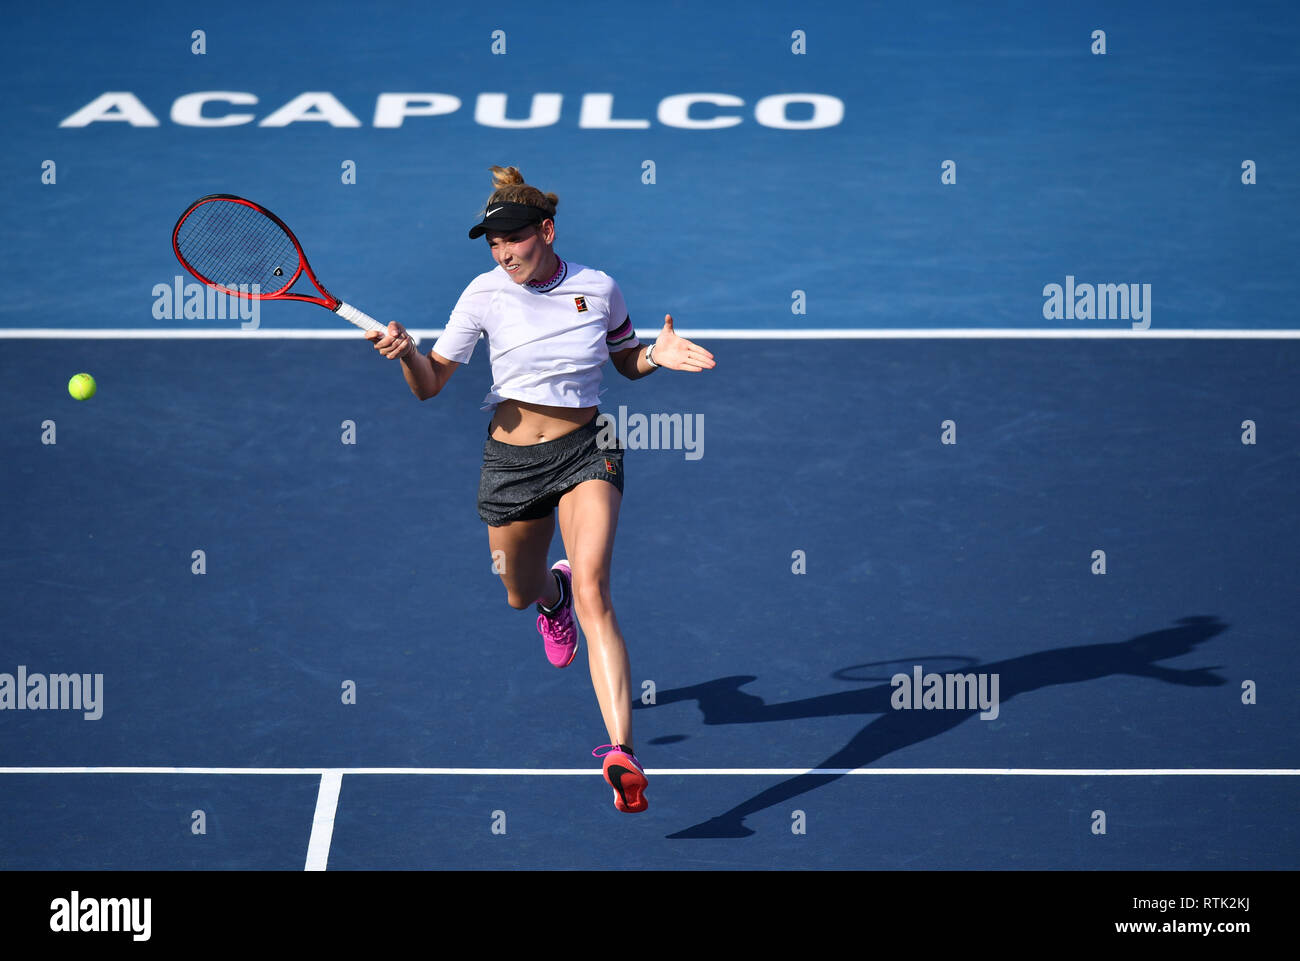 Acapulco, Mexico. 1st Mar, 2019. Donna Vekic of Croatia hits a return the  women's singles semifinal match between Wang Yafan of China and Donna Vekic  of Croatia at the 2019 WTA Mexican